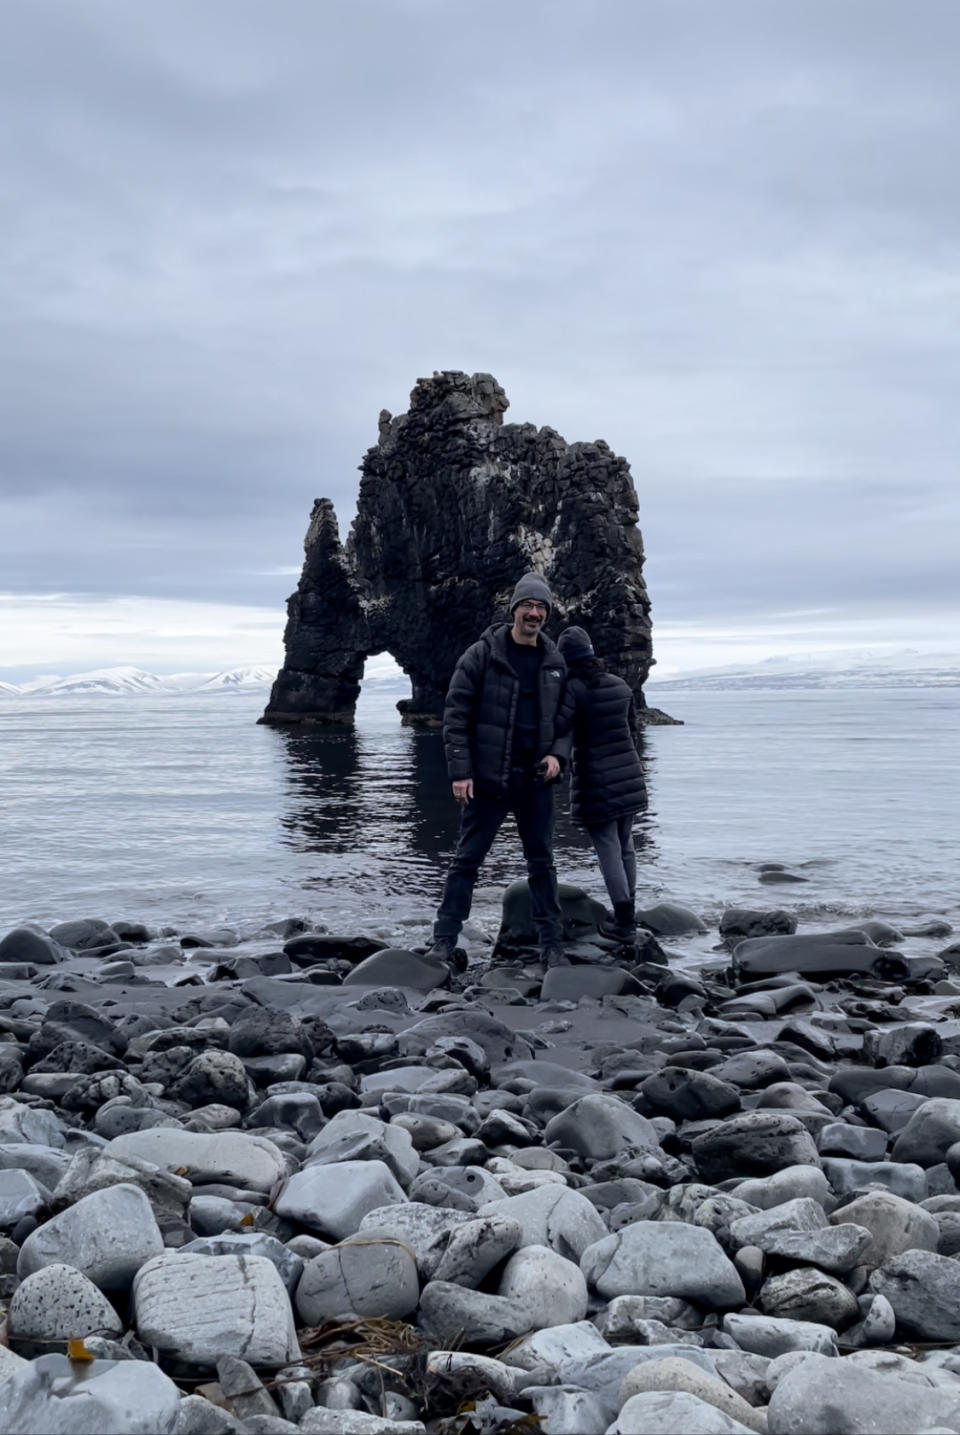 Image: Brent Ozar, an American who moved to Iceland, with his wife Erika. (Brent Ozar)